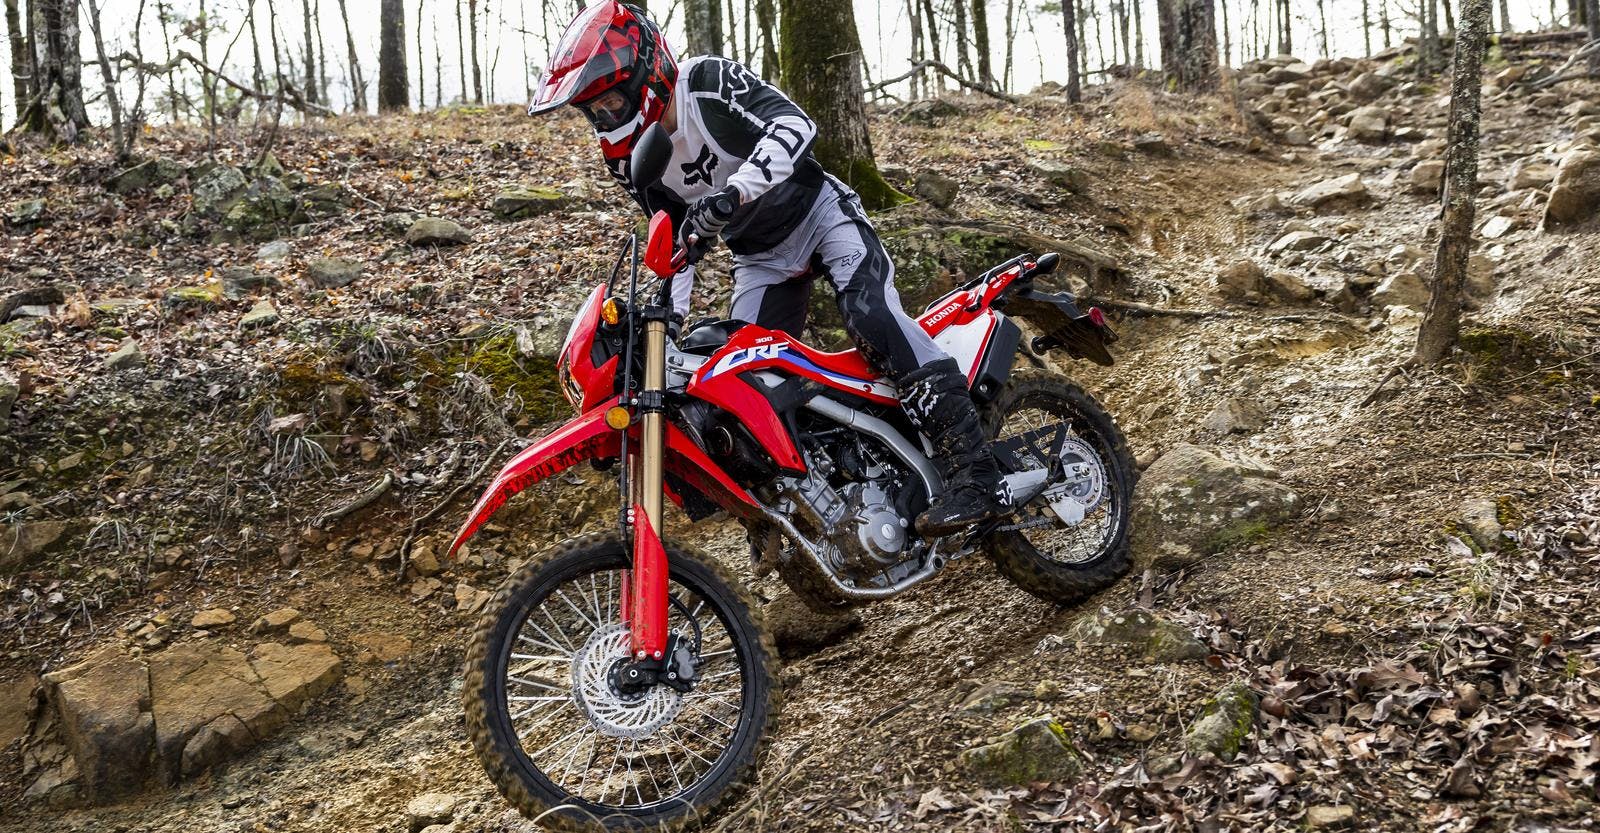 Honda CRF300L in extreme red colour on off road track